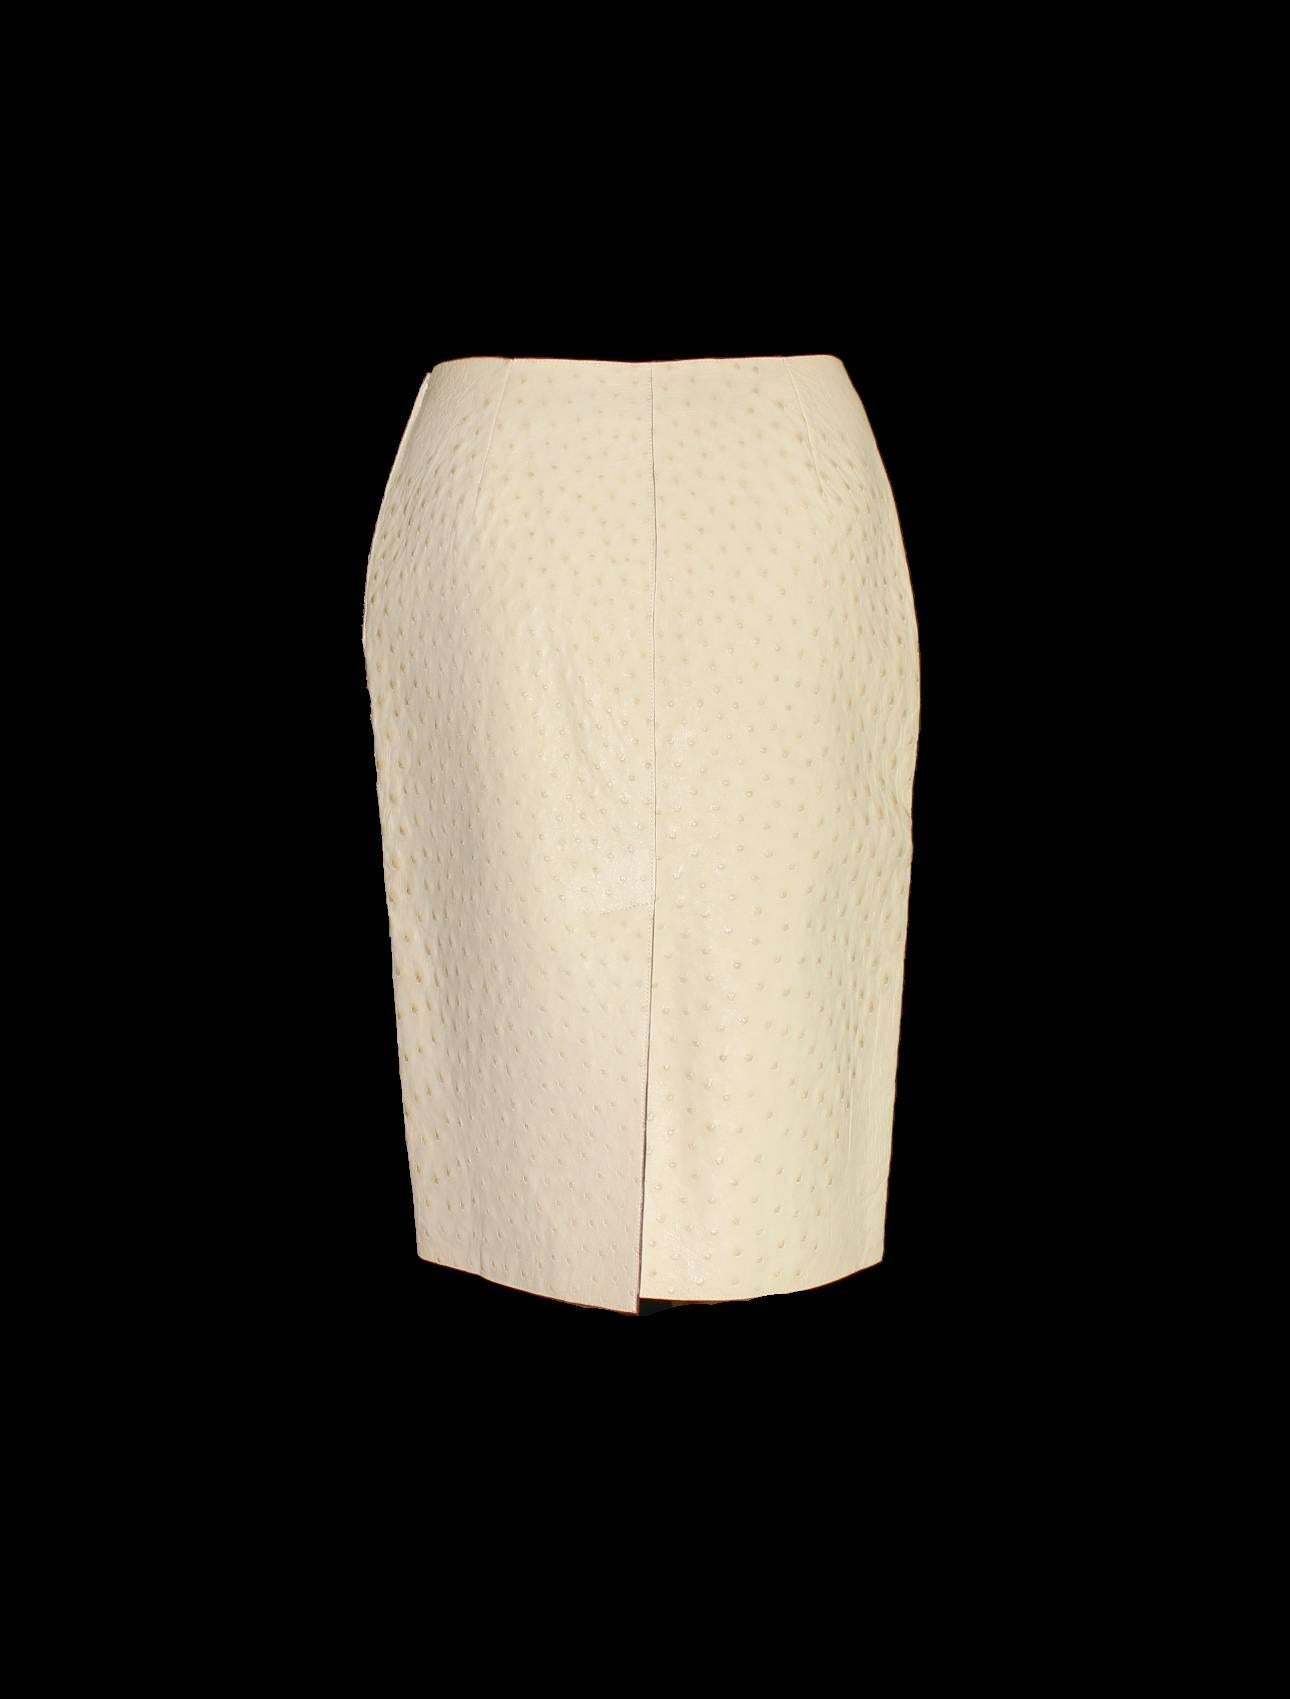 A stunning Ostrich Skin Skirt in fabulous ivory color
Timeless elegance in the most exclusive exotic skin
The skirt is approximately knee-length and slightly flared
It has a vent in the back
Made in Italy
Special Dry Clean
Size IT42
Ostich skirts